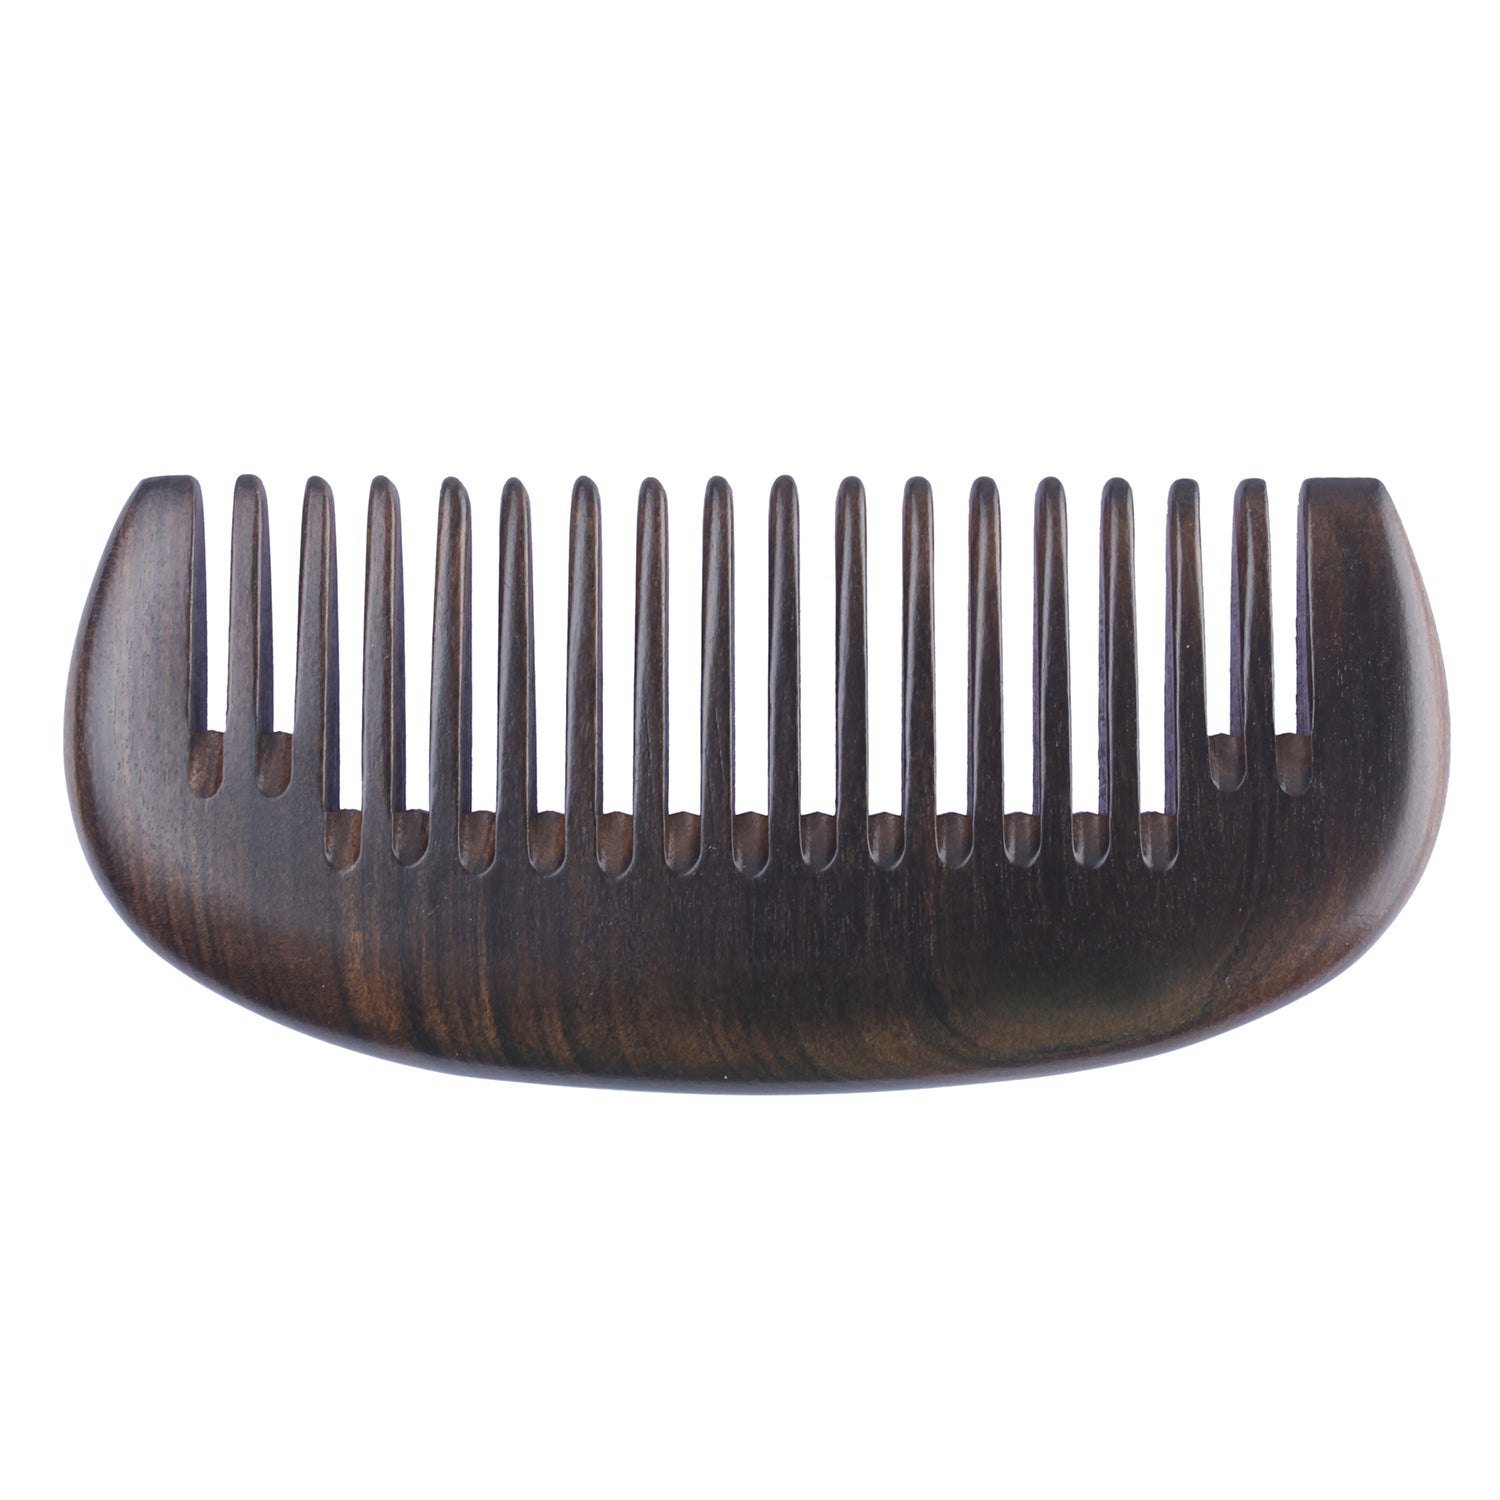 Breezelike No Static Small Chacate Preto Wood Pocket Comb with Painted ...